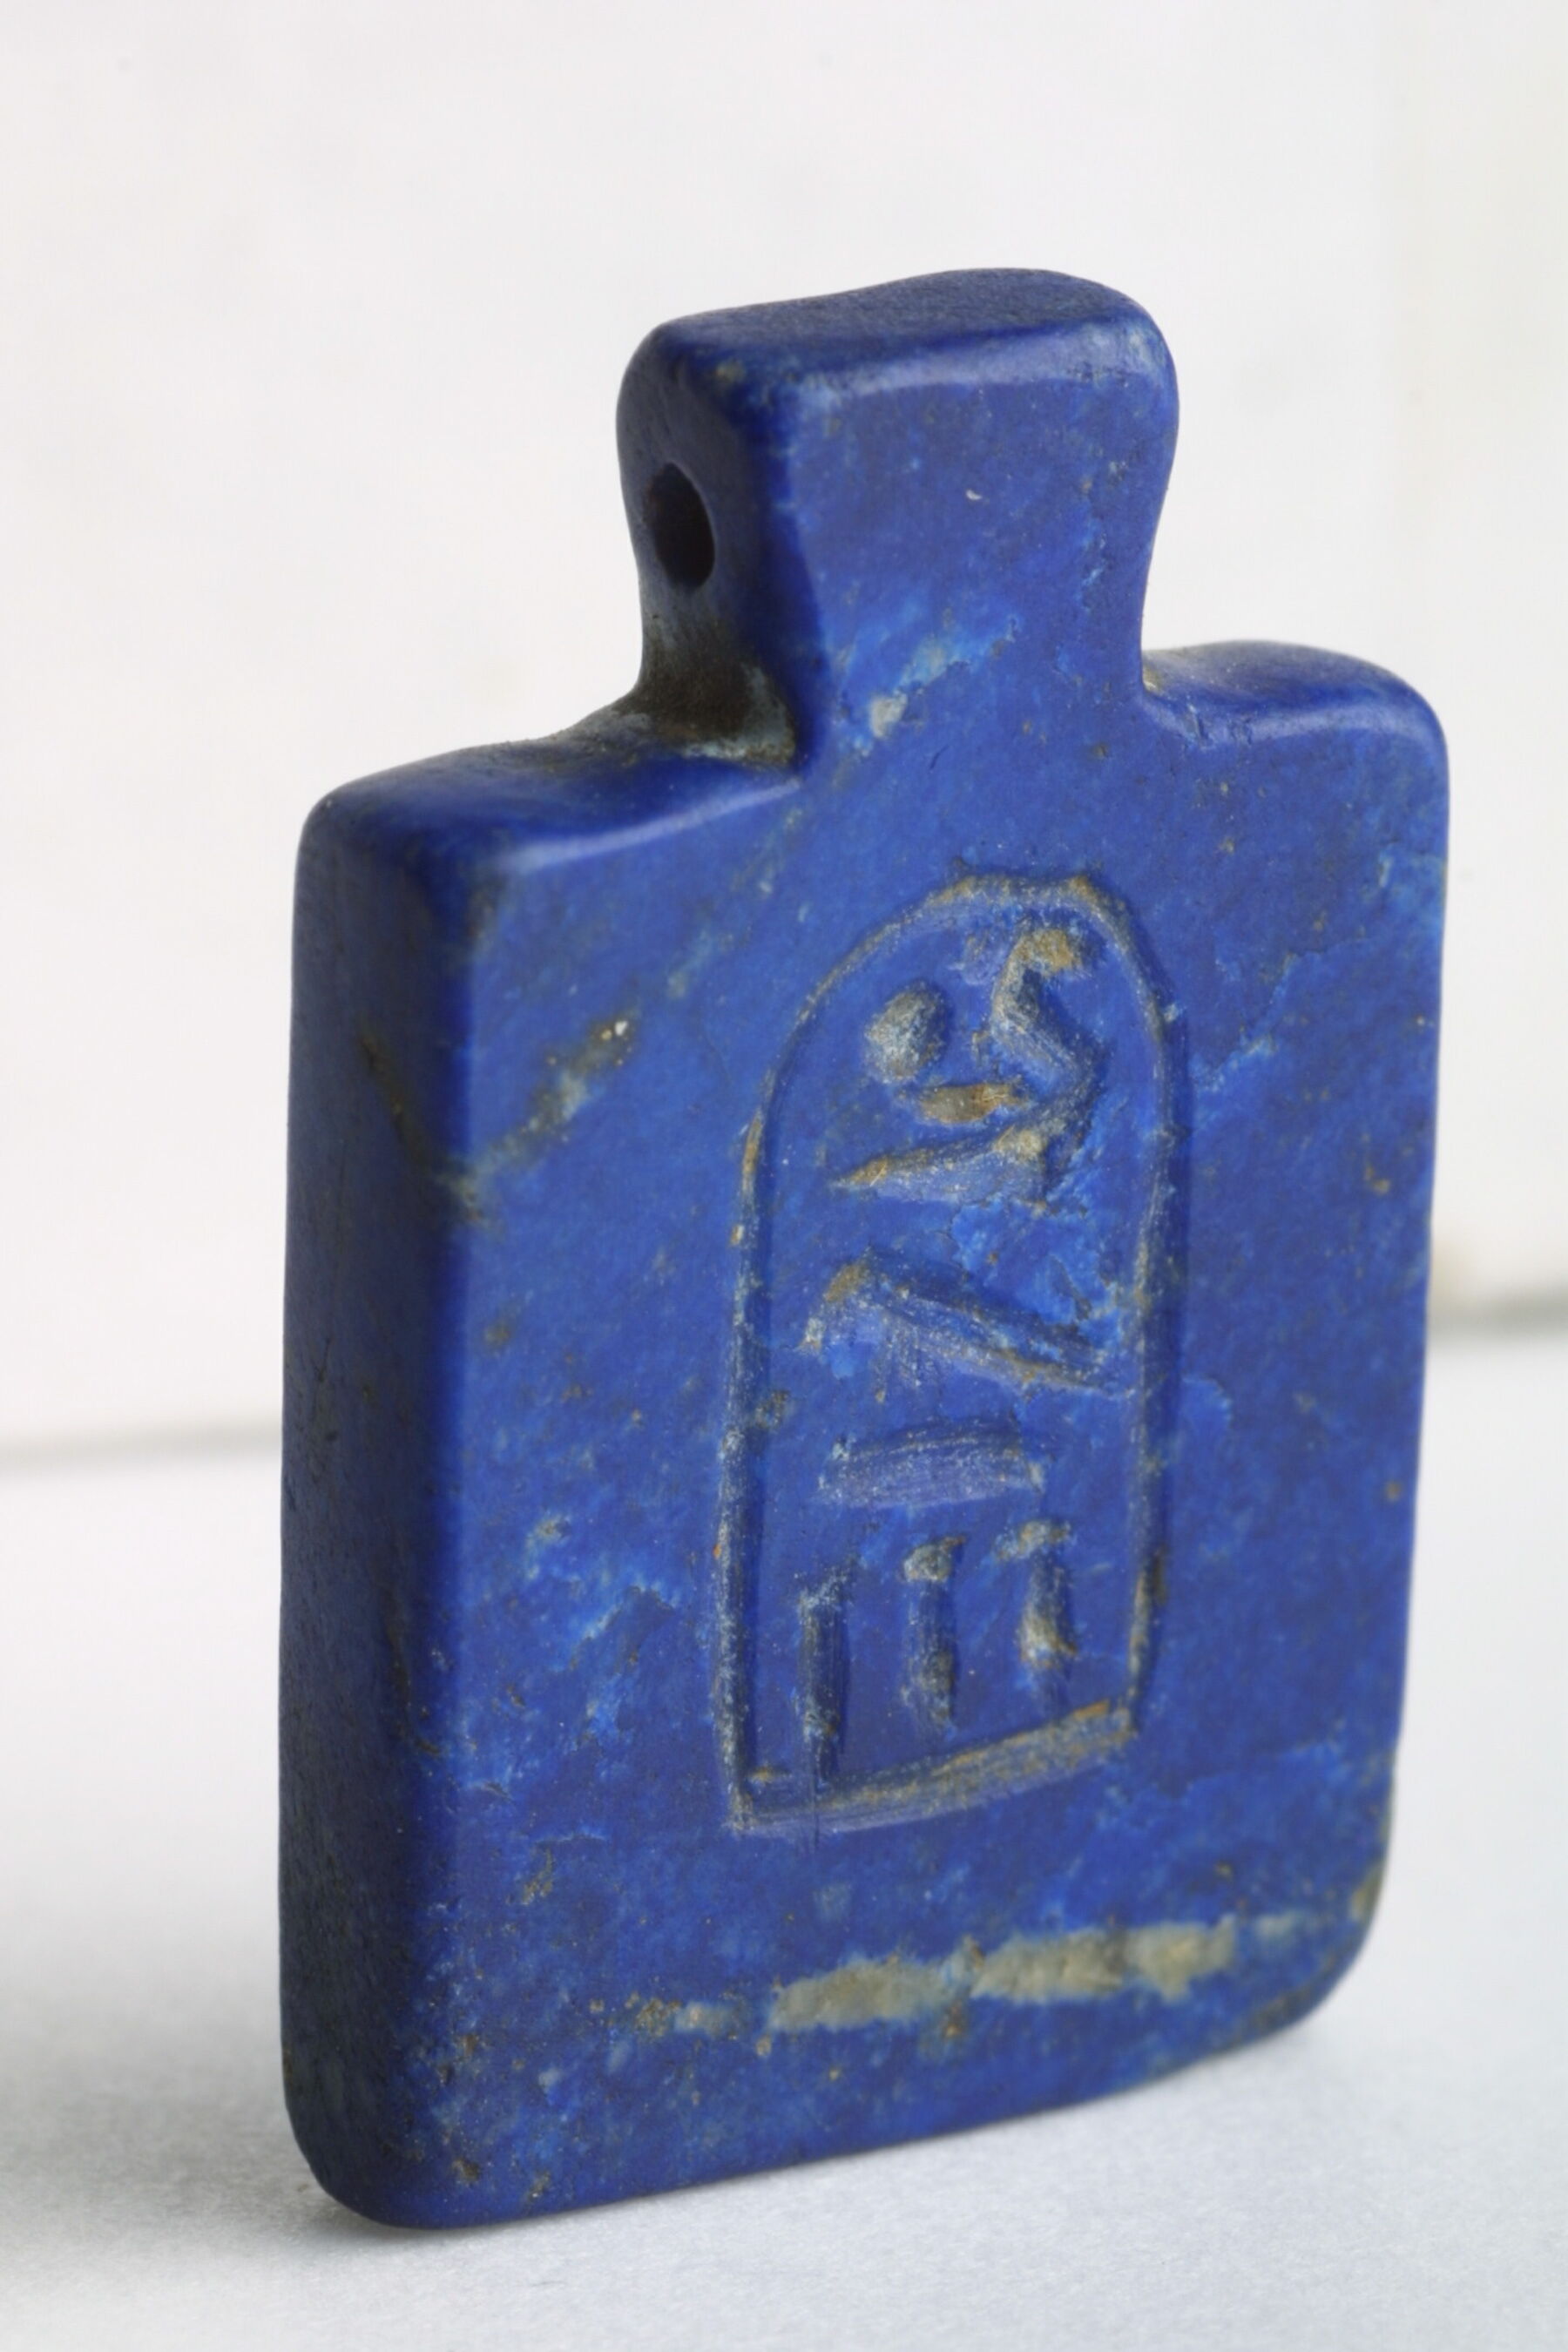 Lapis Tablet Amulet with the Name of Maathorneferure